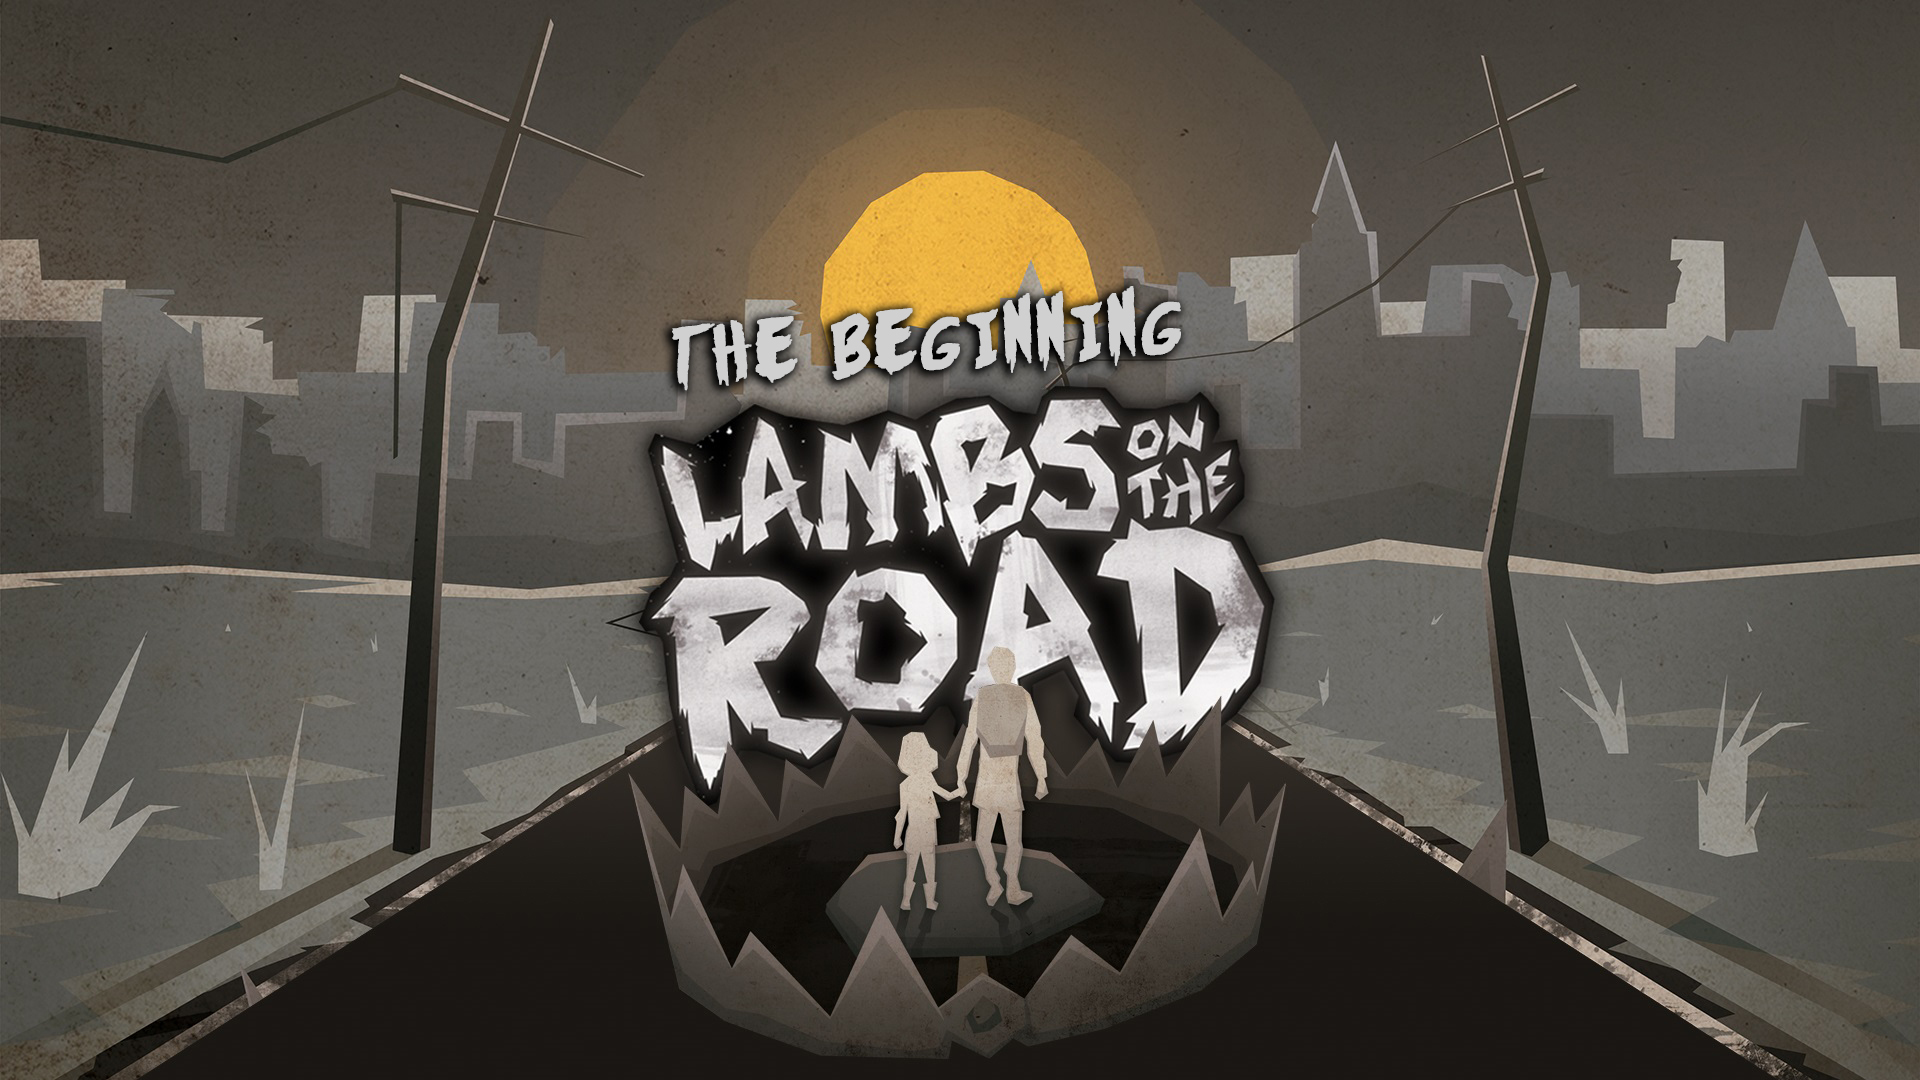 Lambs on the Road